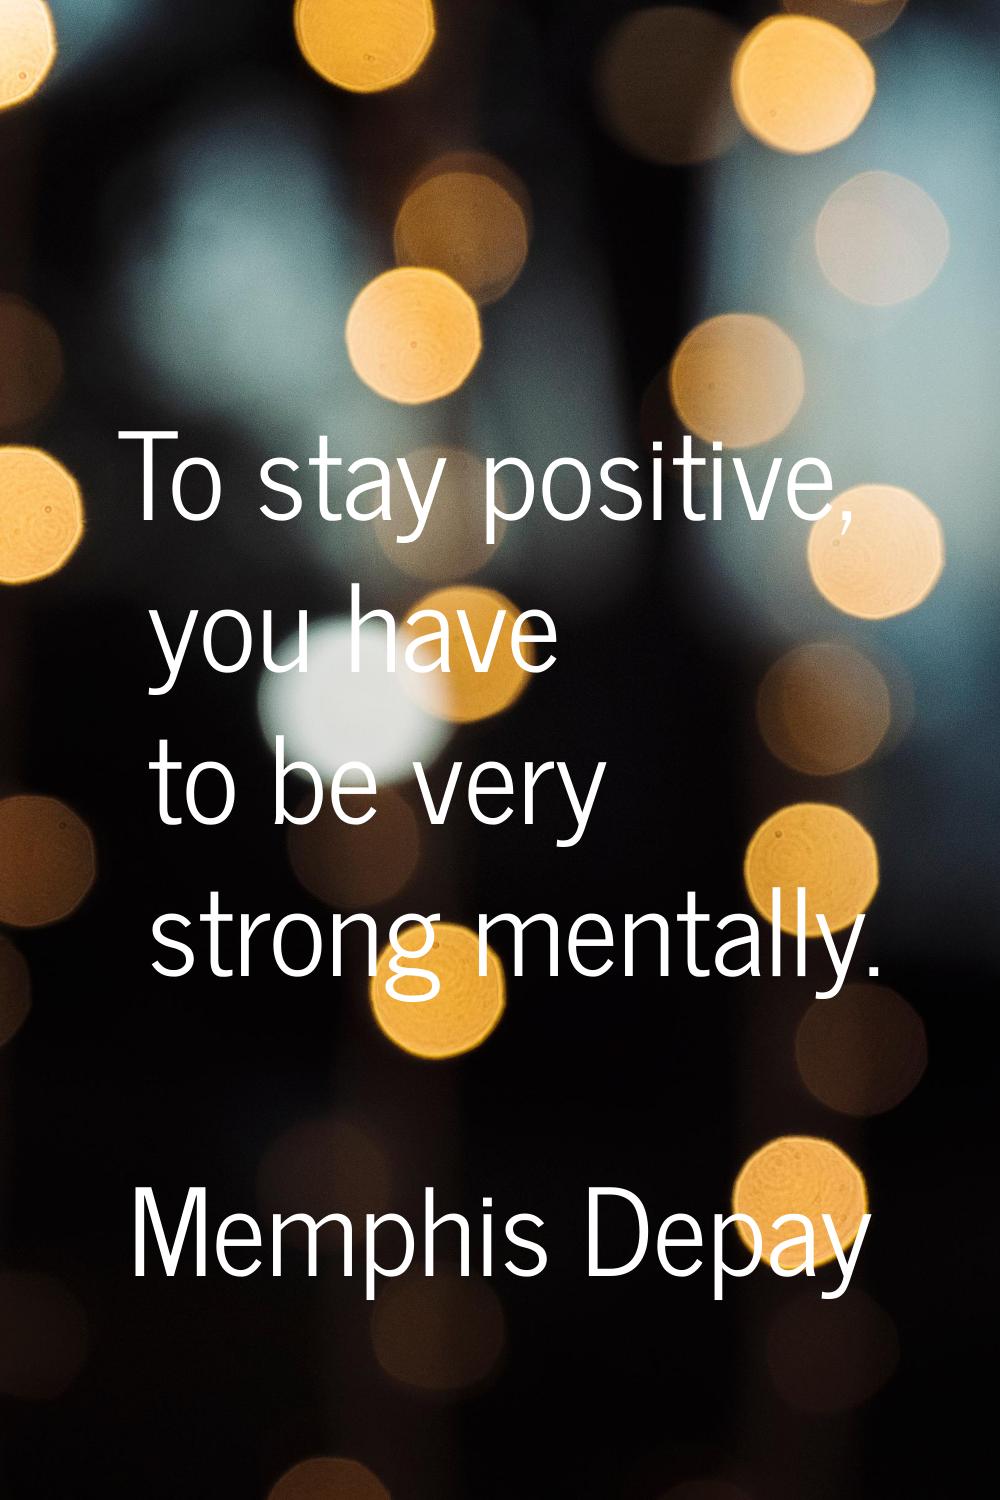 To stay positive, you have to be very strong mentally.